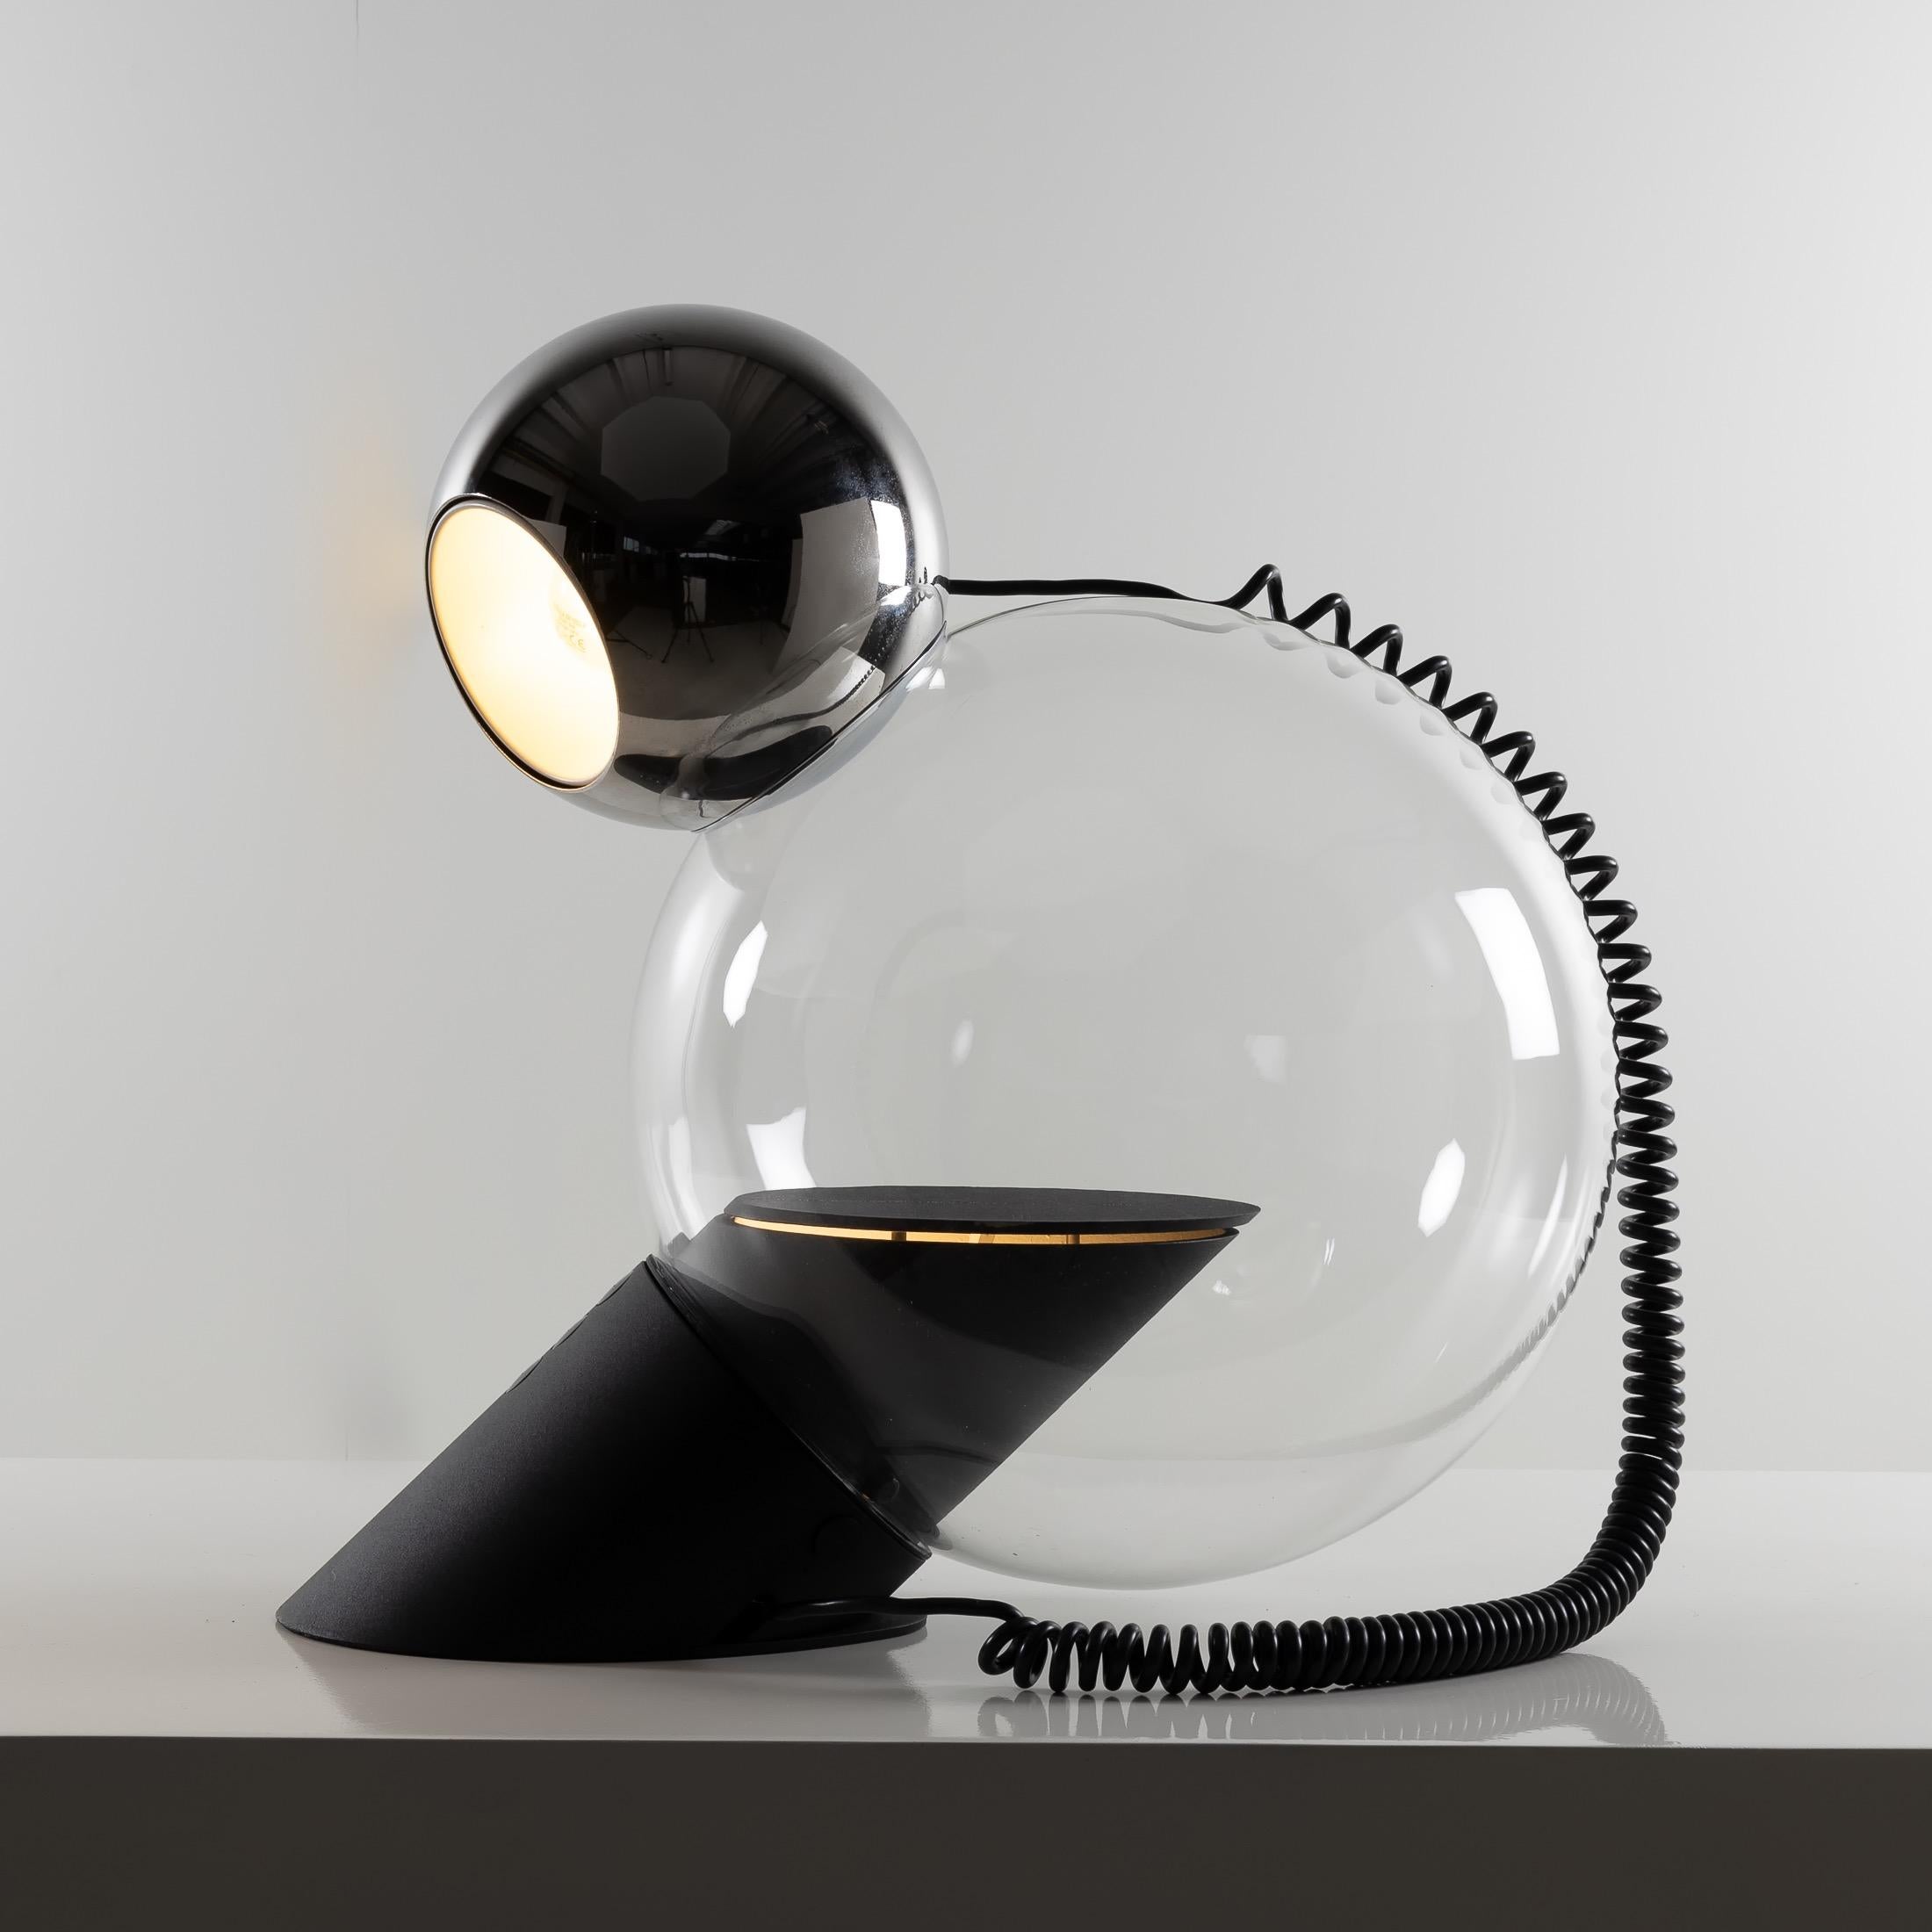 About Gravita, table lamp by Antonio Macchi Cassia
Adjustable table lamp, The luminaire in the form of a chrome 